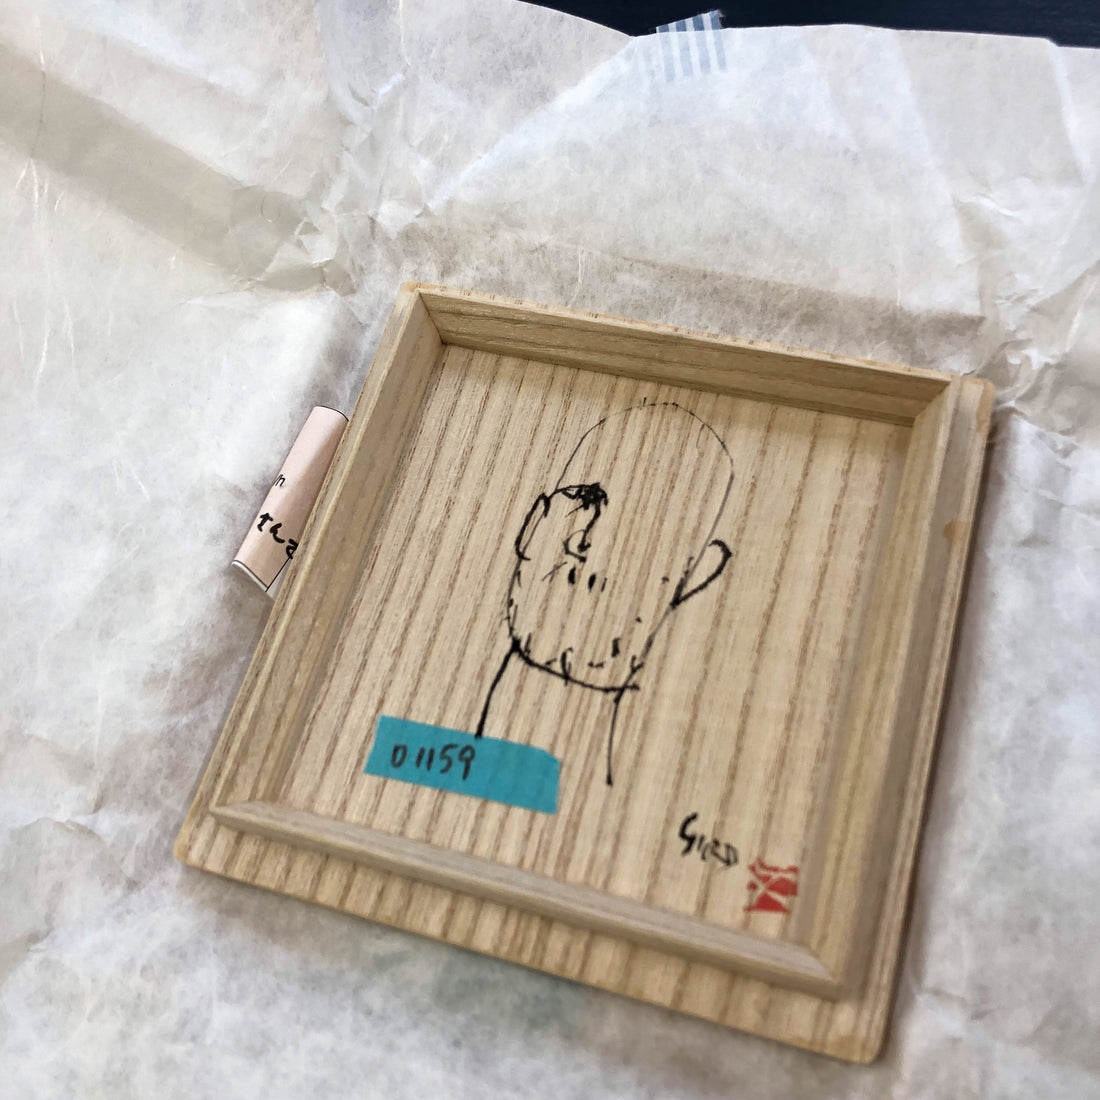 3rd Small Talk "Special drawings on the wood box"